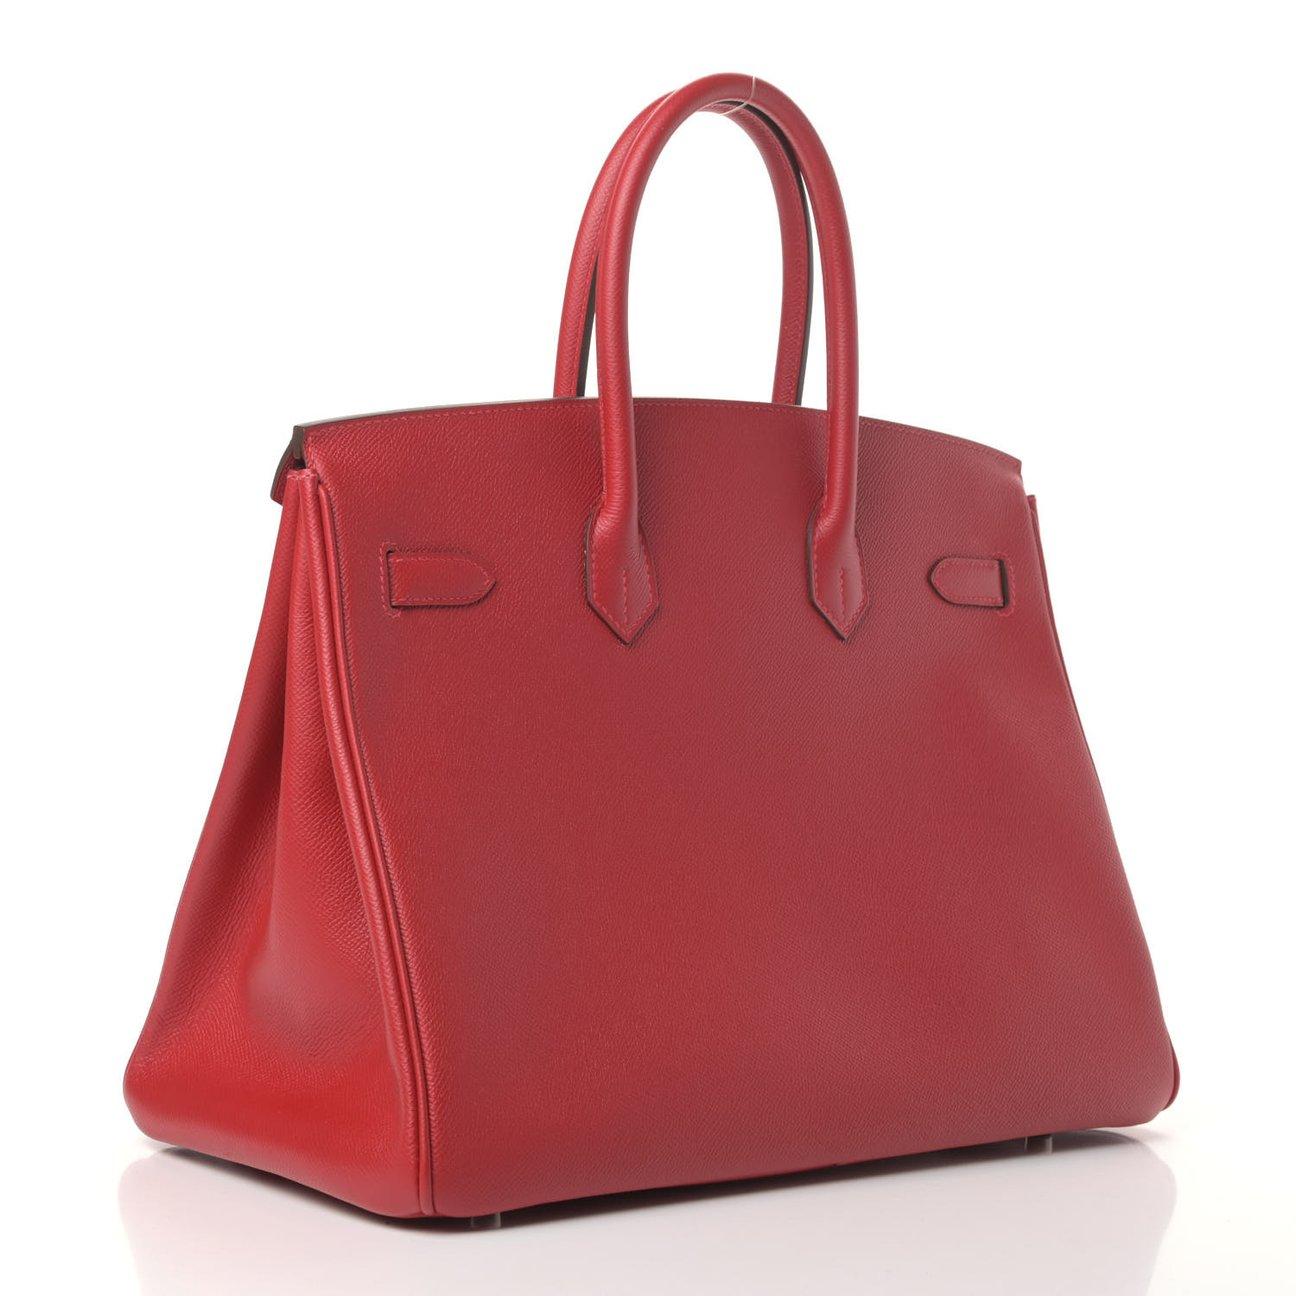 New Condition
From 2014 Condition
Rouge Casaque
Epsom Leather
Palladium Hardware
Measures 13.75